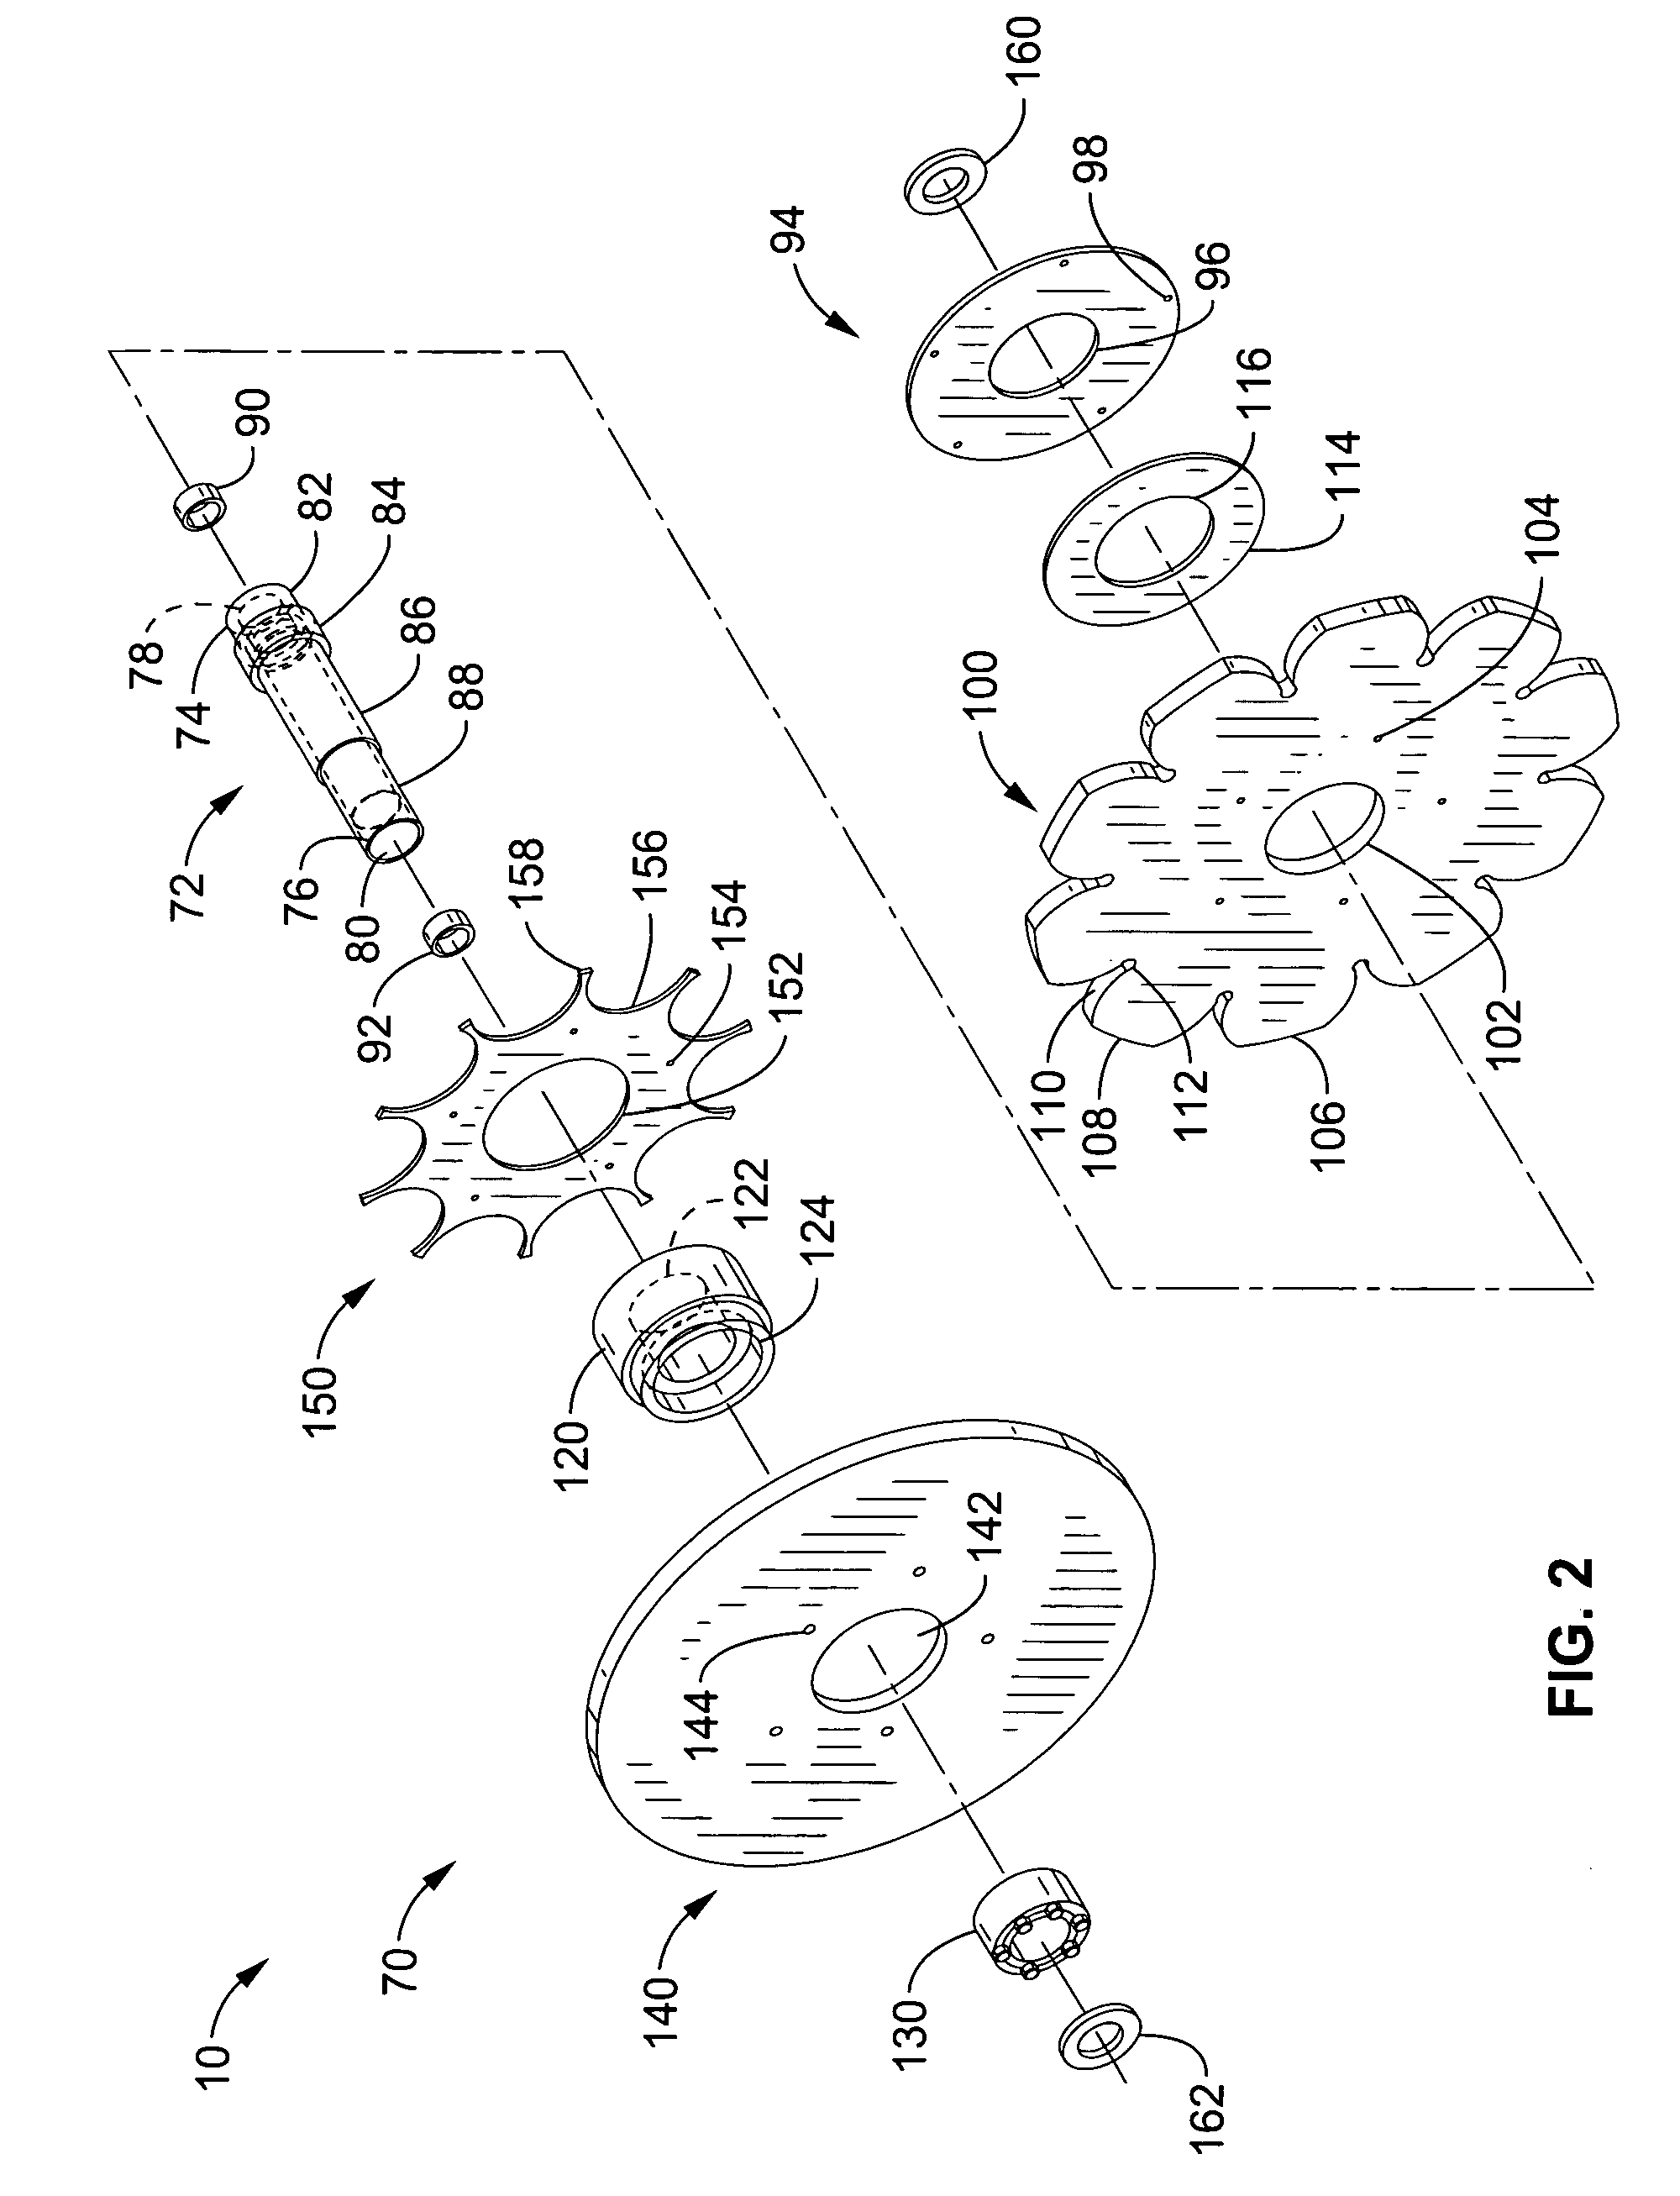 Can extractor apparatus